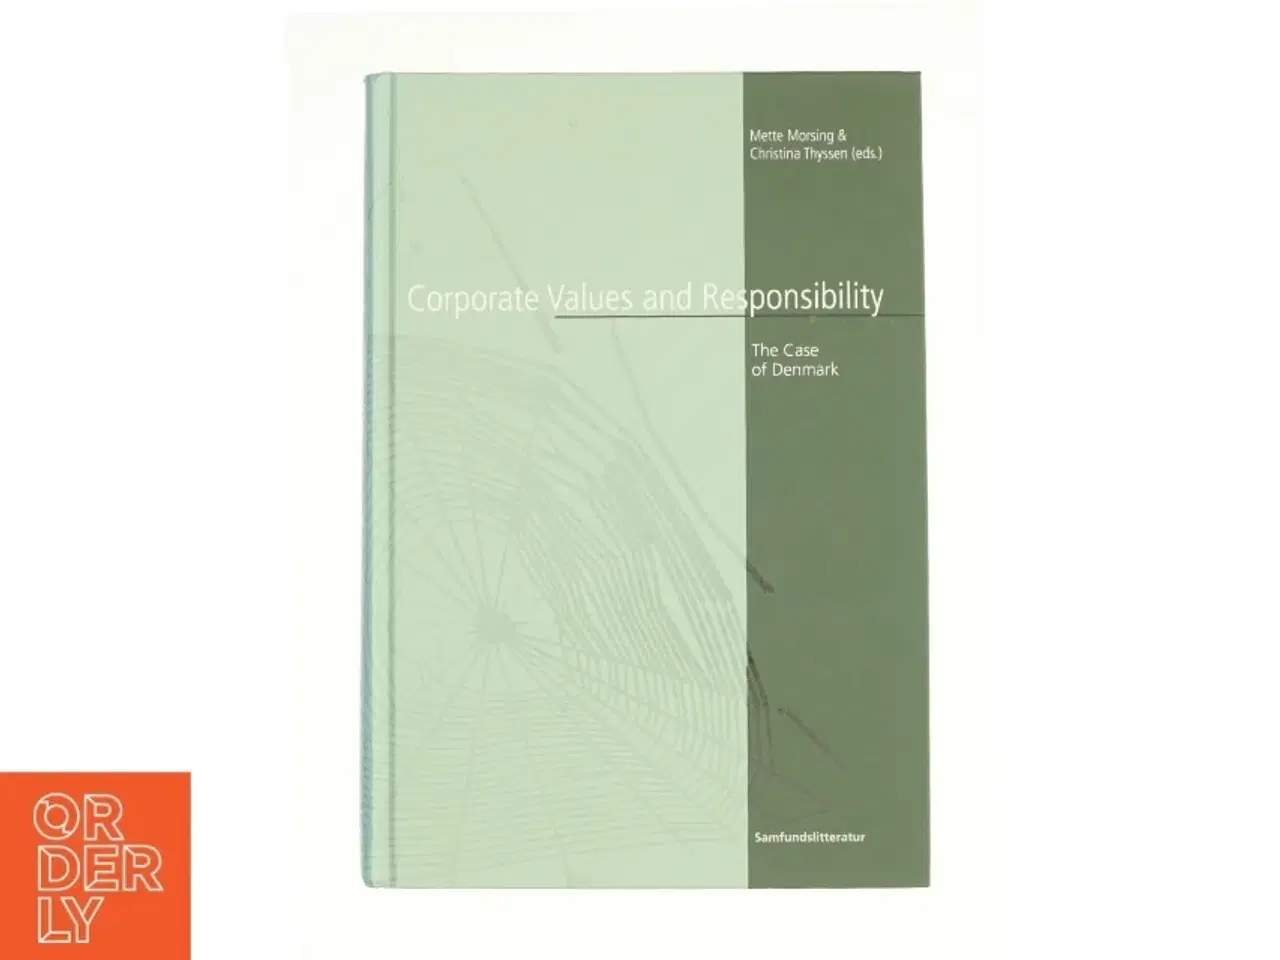 Billede 1 - Corporate Values and Responsibility - 1st Edition (eBook) (Bog)